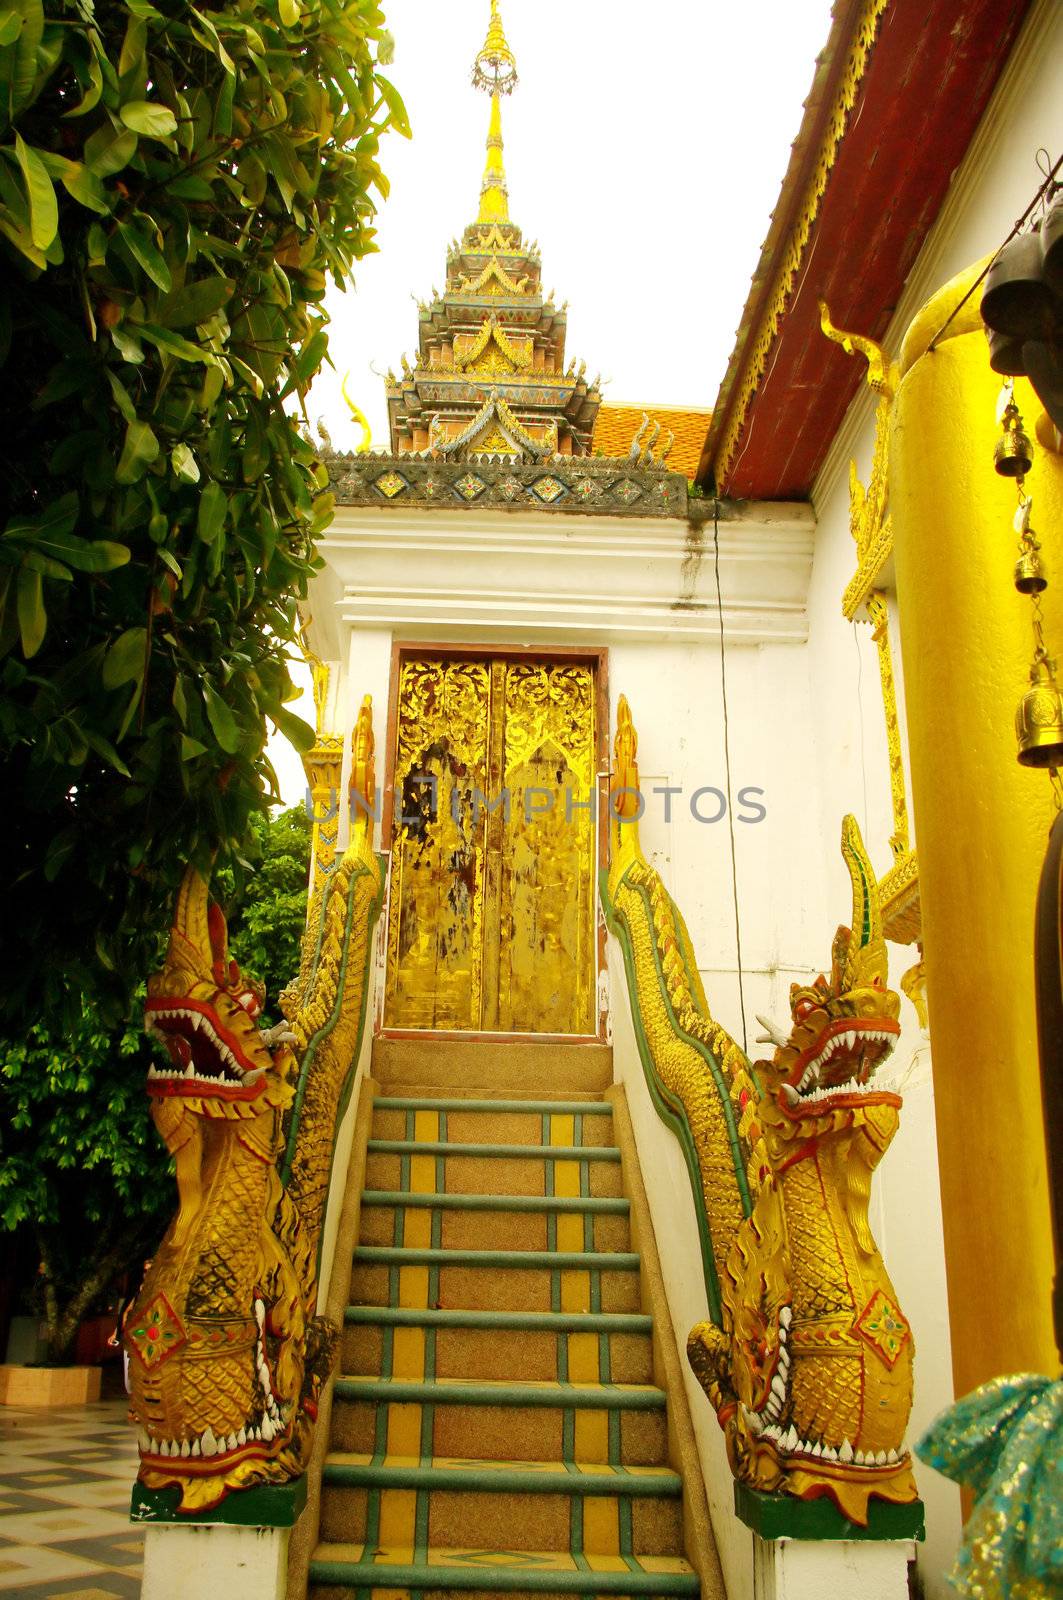 Back door of the temple Wat Phrathat Doi Suthep in Chiang Mai in the north-western Thailand.
As usual the stairs are often decorated with dragons mythical animals in the Buddhist religion.